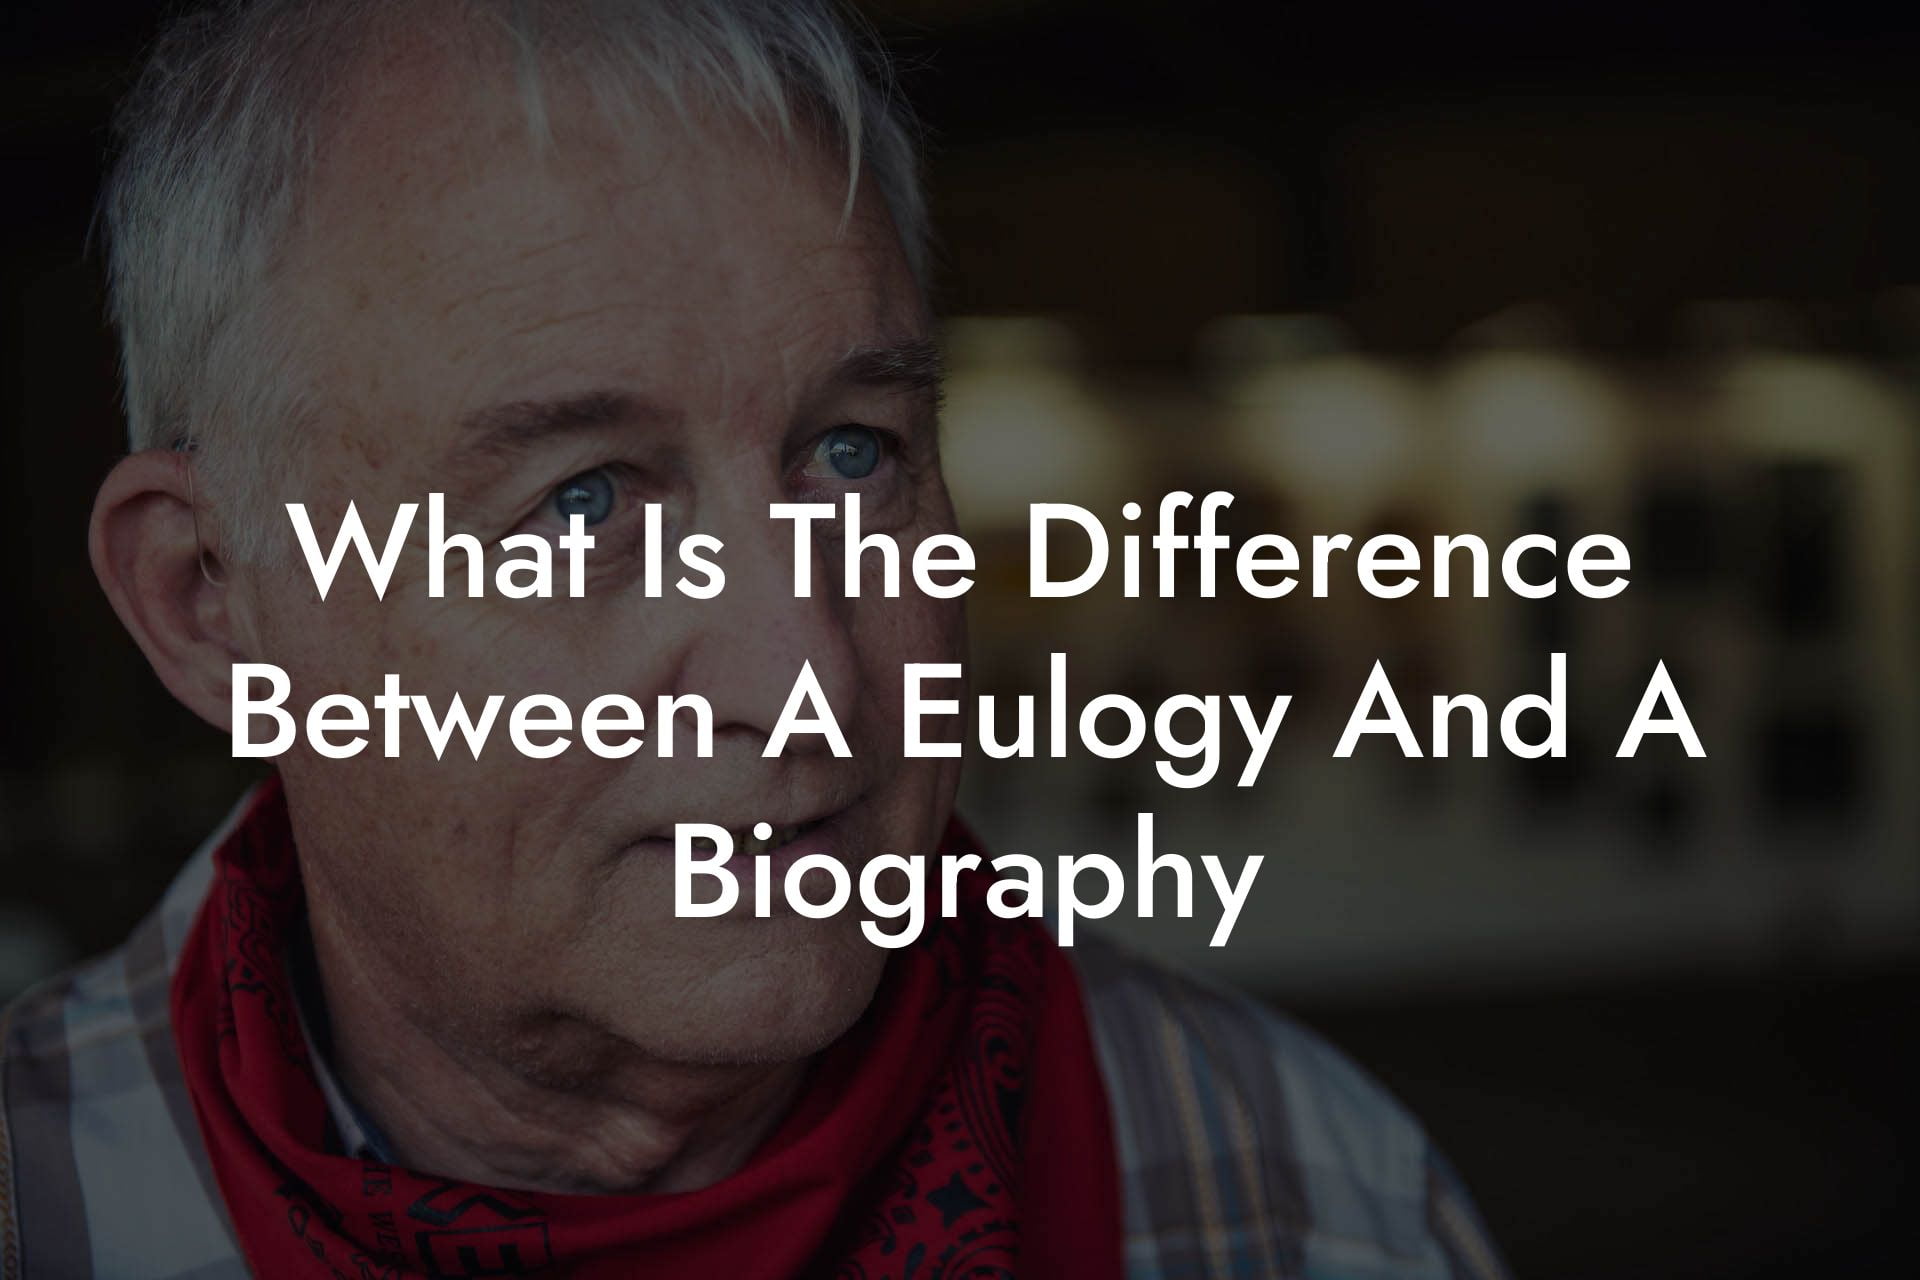 What Is The Difference Between A Eulogy And A Biography